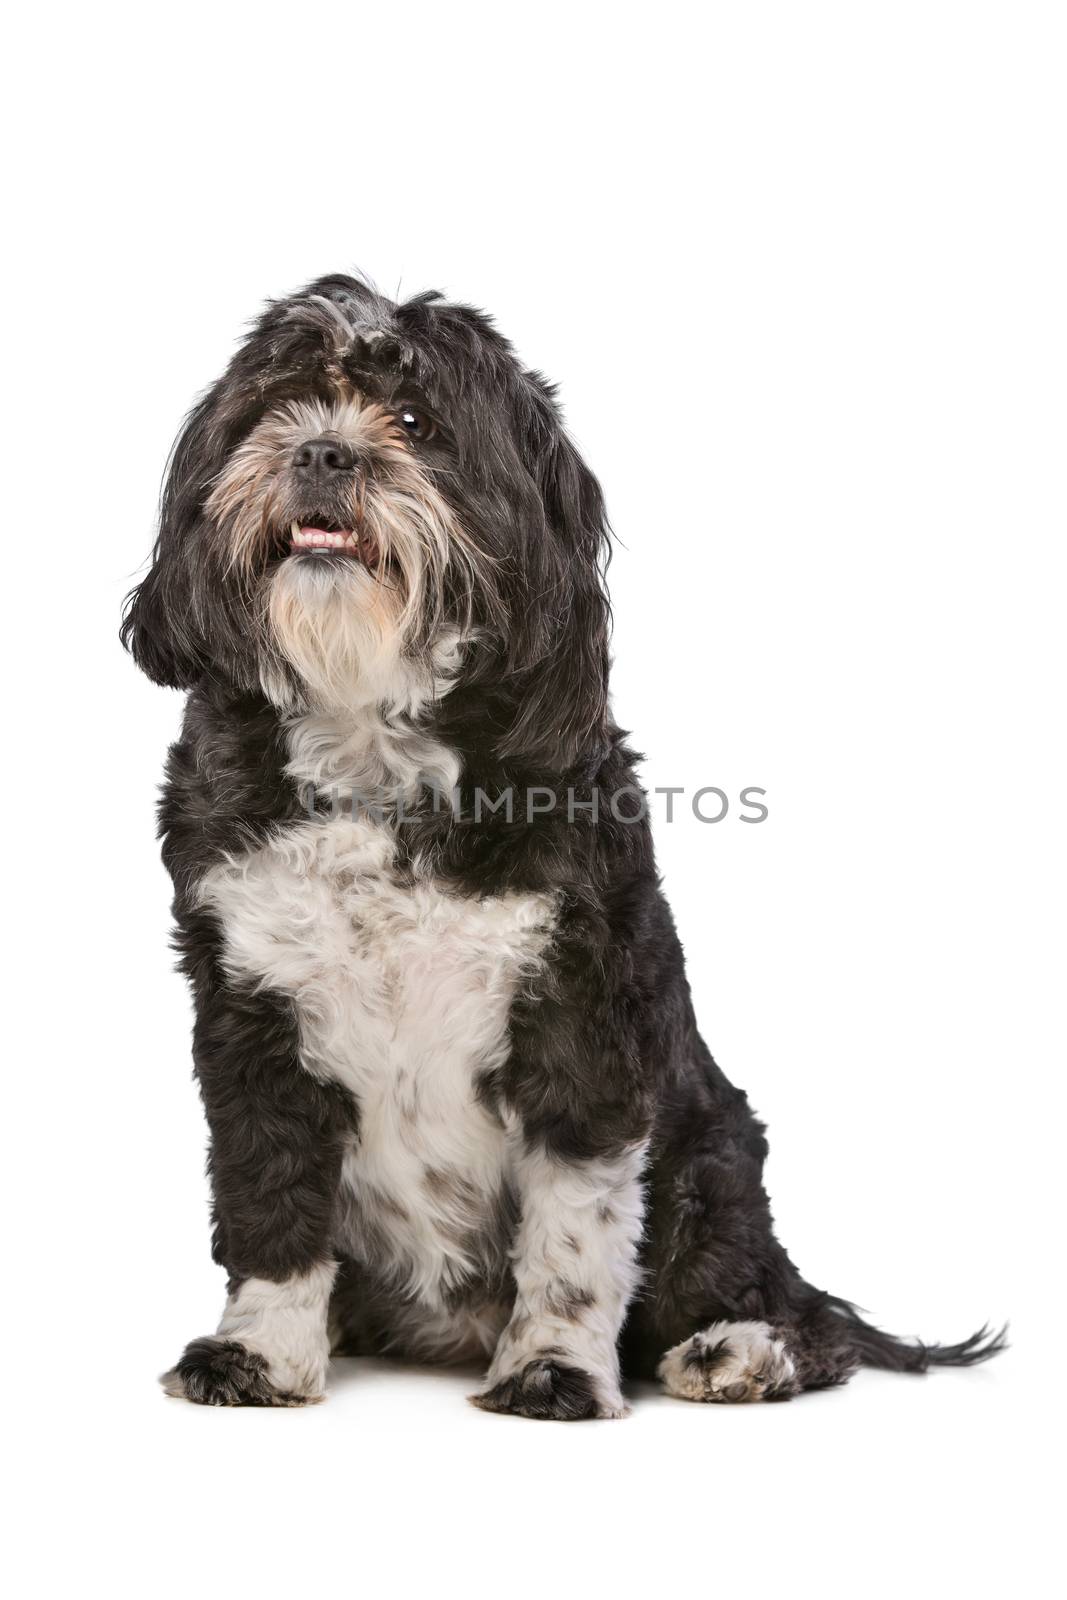 Mixed breed small fluffy dog in front of a white background